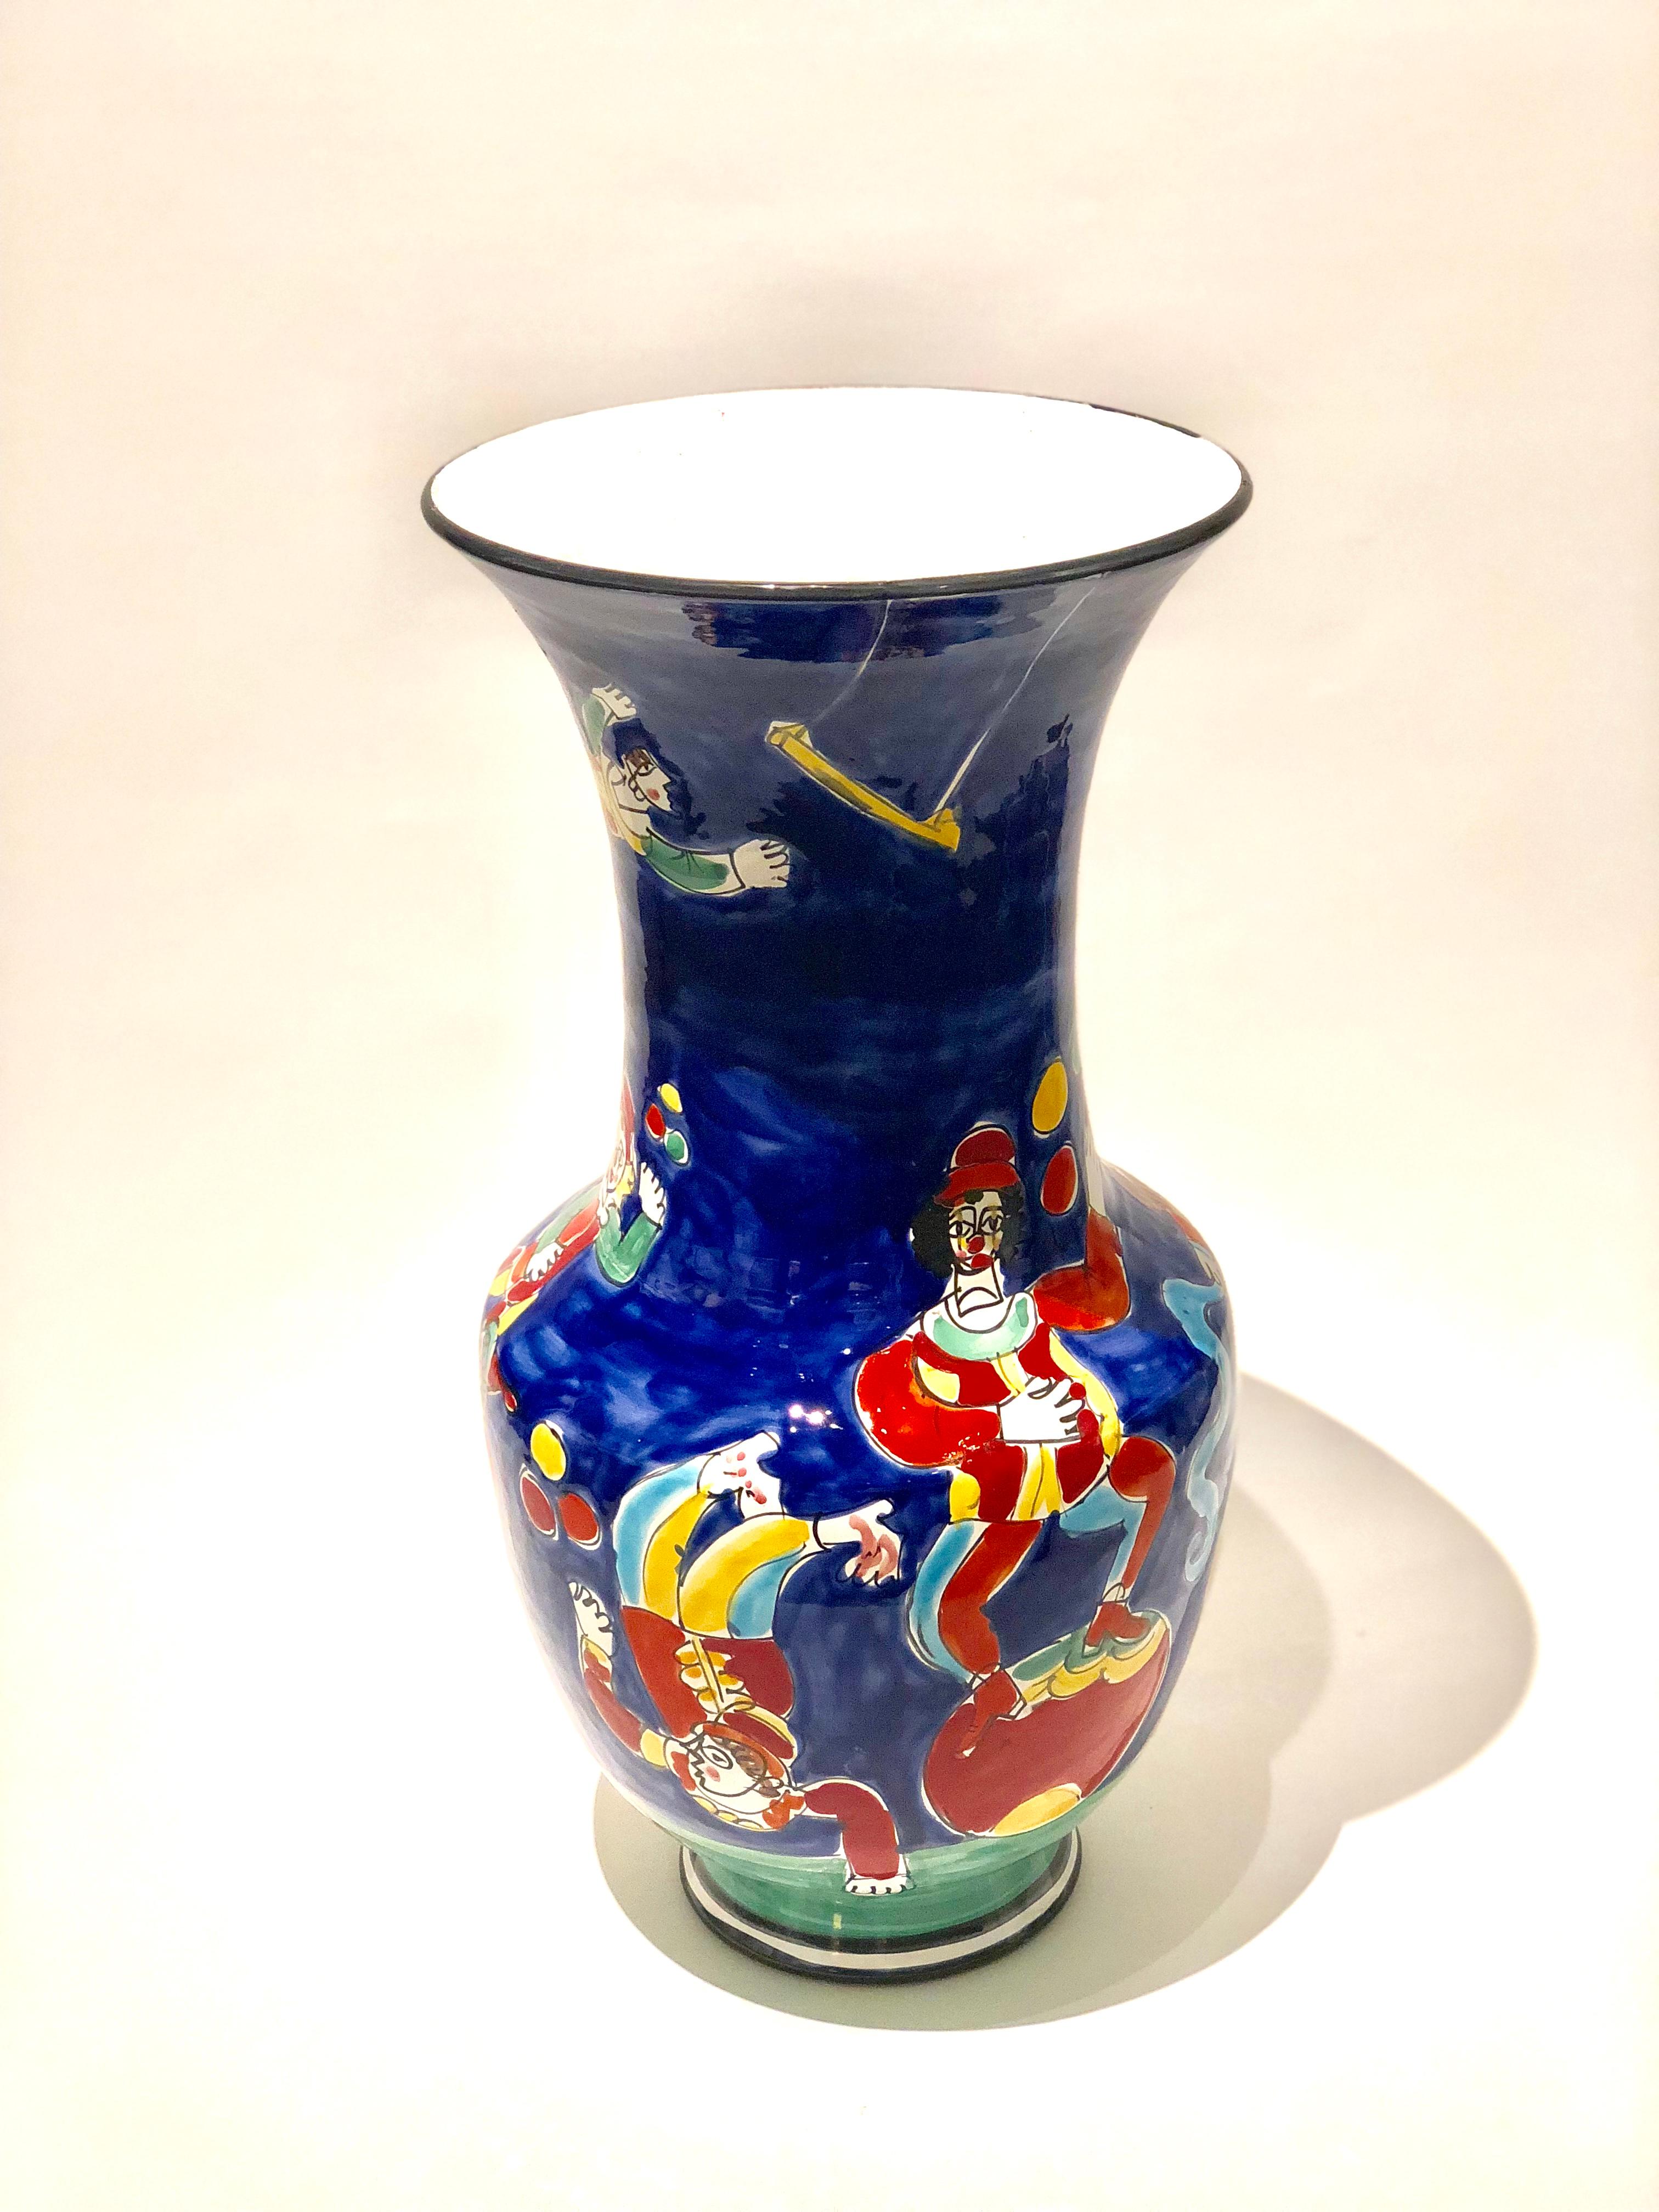 Colorful Italian ceramic hand painted vase, circa 1970s, in great original condition nice circus theme signed.